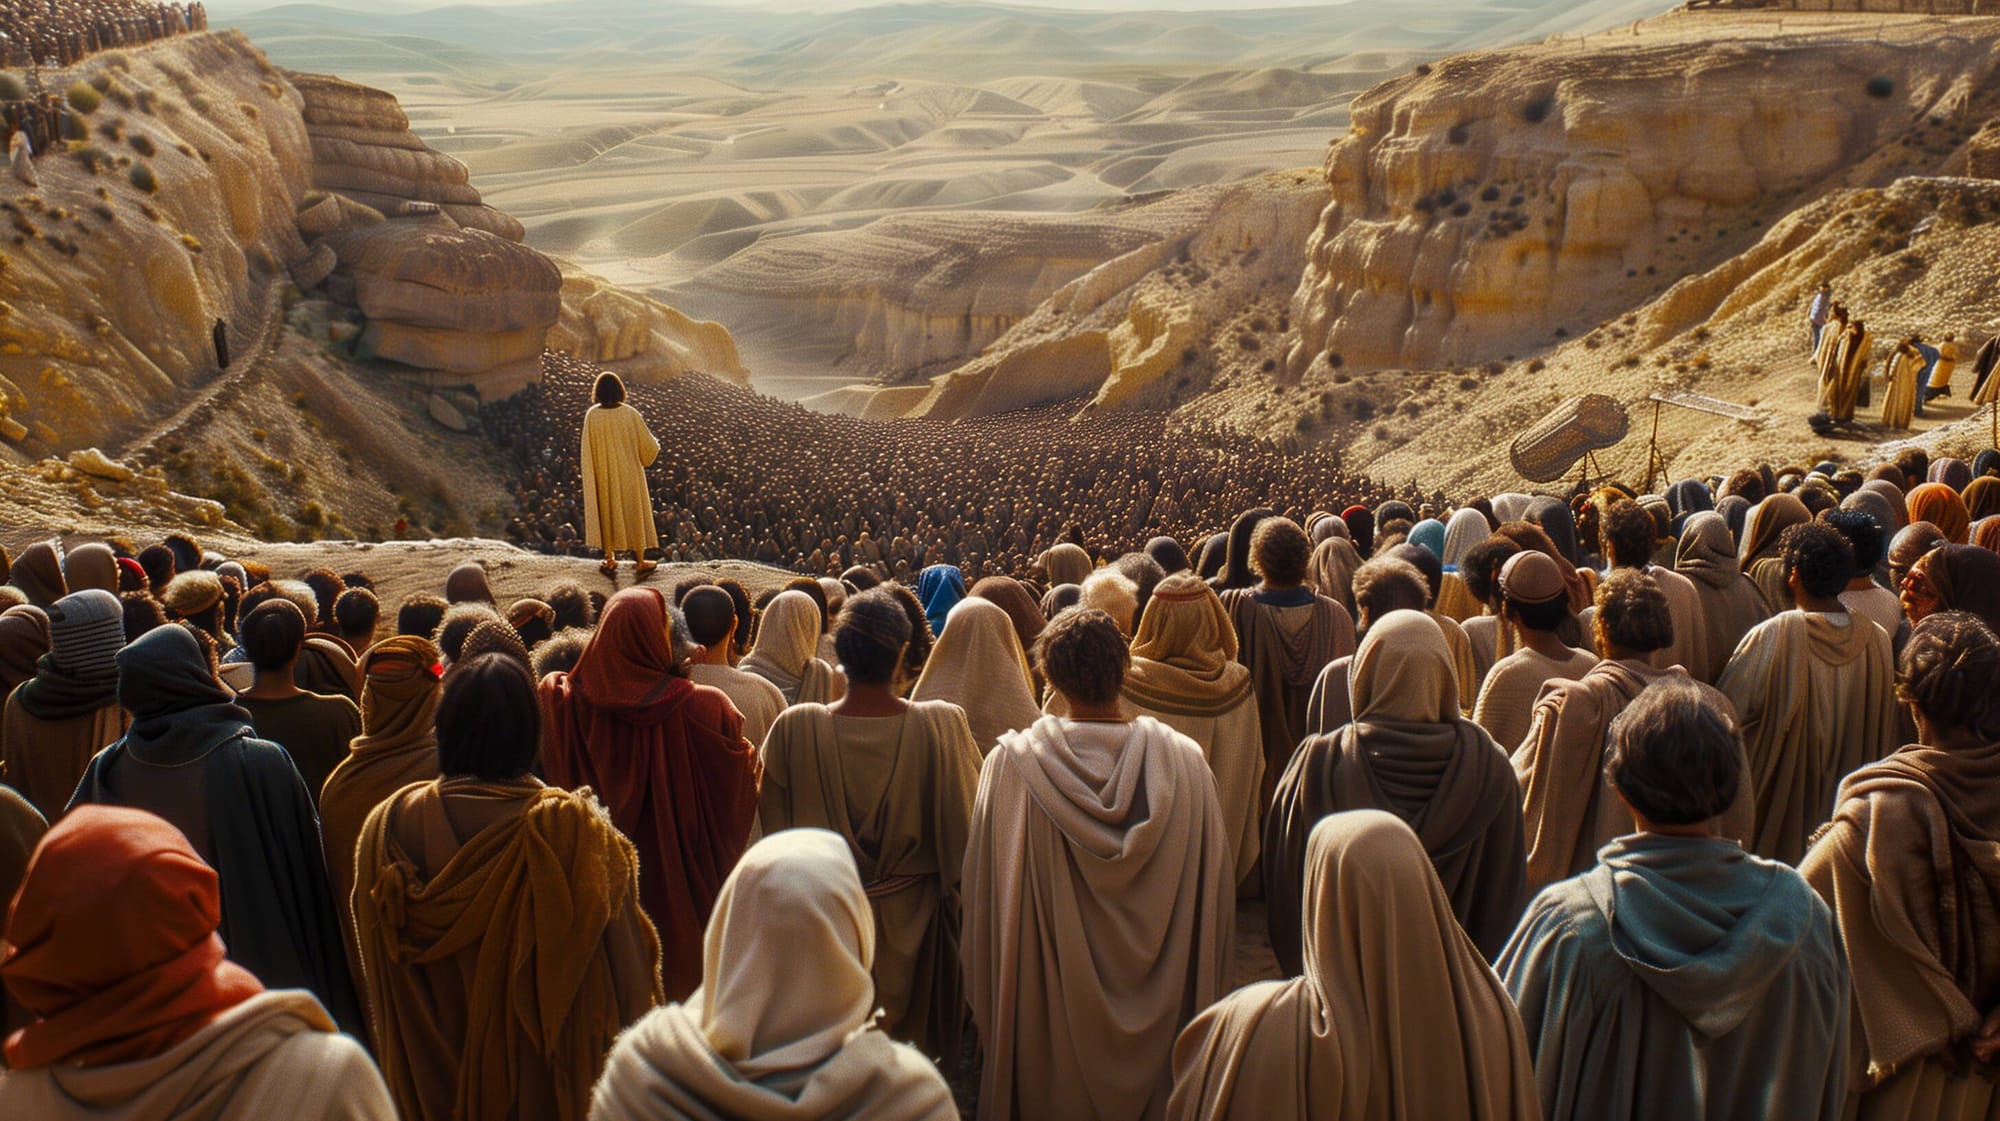 Jesus had such a popularity and crowd-gathering ability, that might have made the Romans feel uneasy.